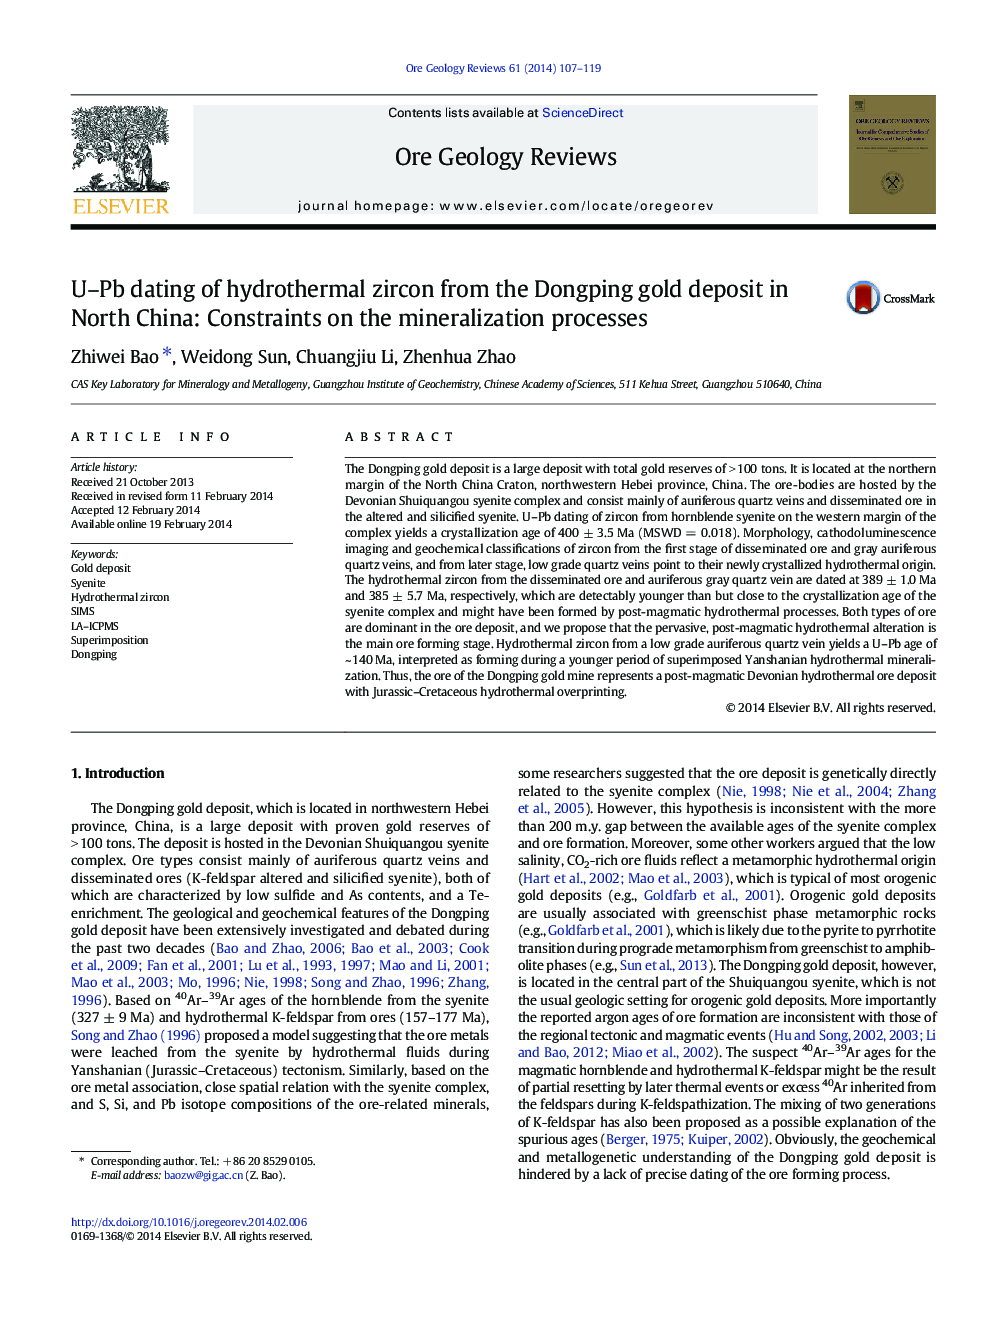 U–Pb dating of hydrothermal zircon from the Dongping gold deposit in North China: Constraints on the mineralization processes